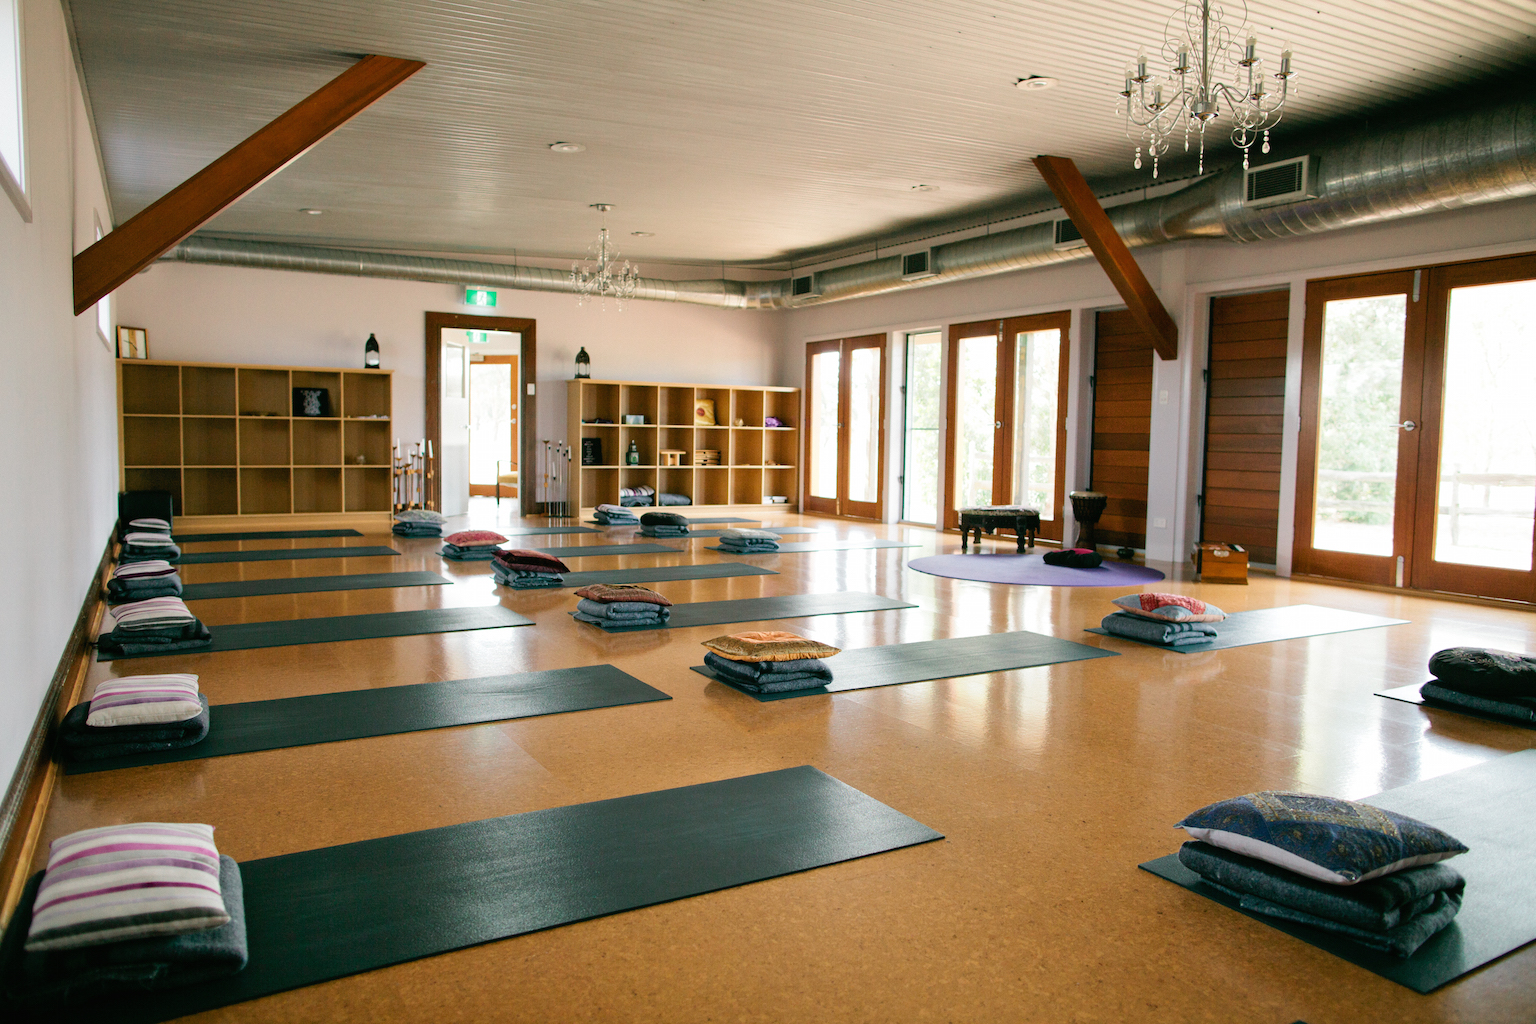 A look at The Yoga Shed's luxurious stuido, with yoga mats all set up